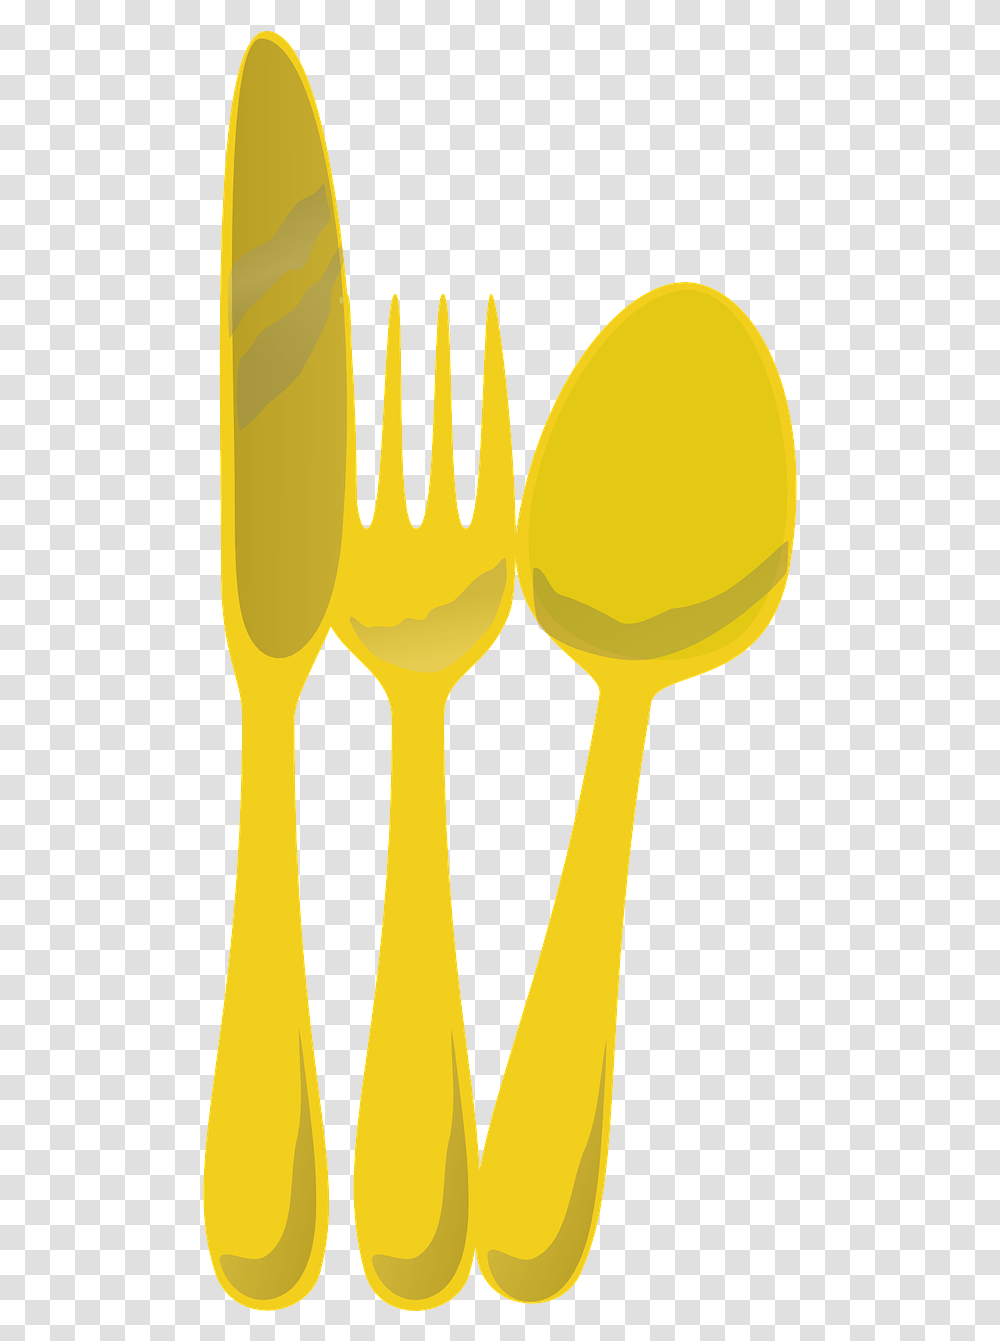 Plastic, Cutlery, Fork, Spoon Transparent Png